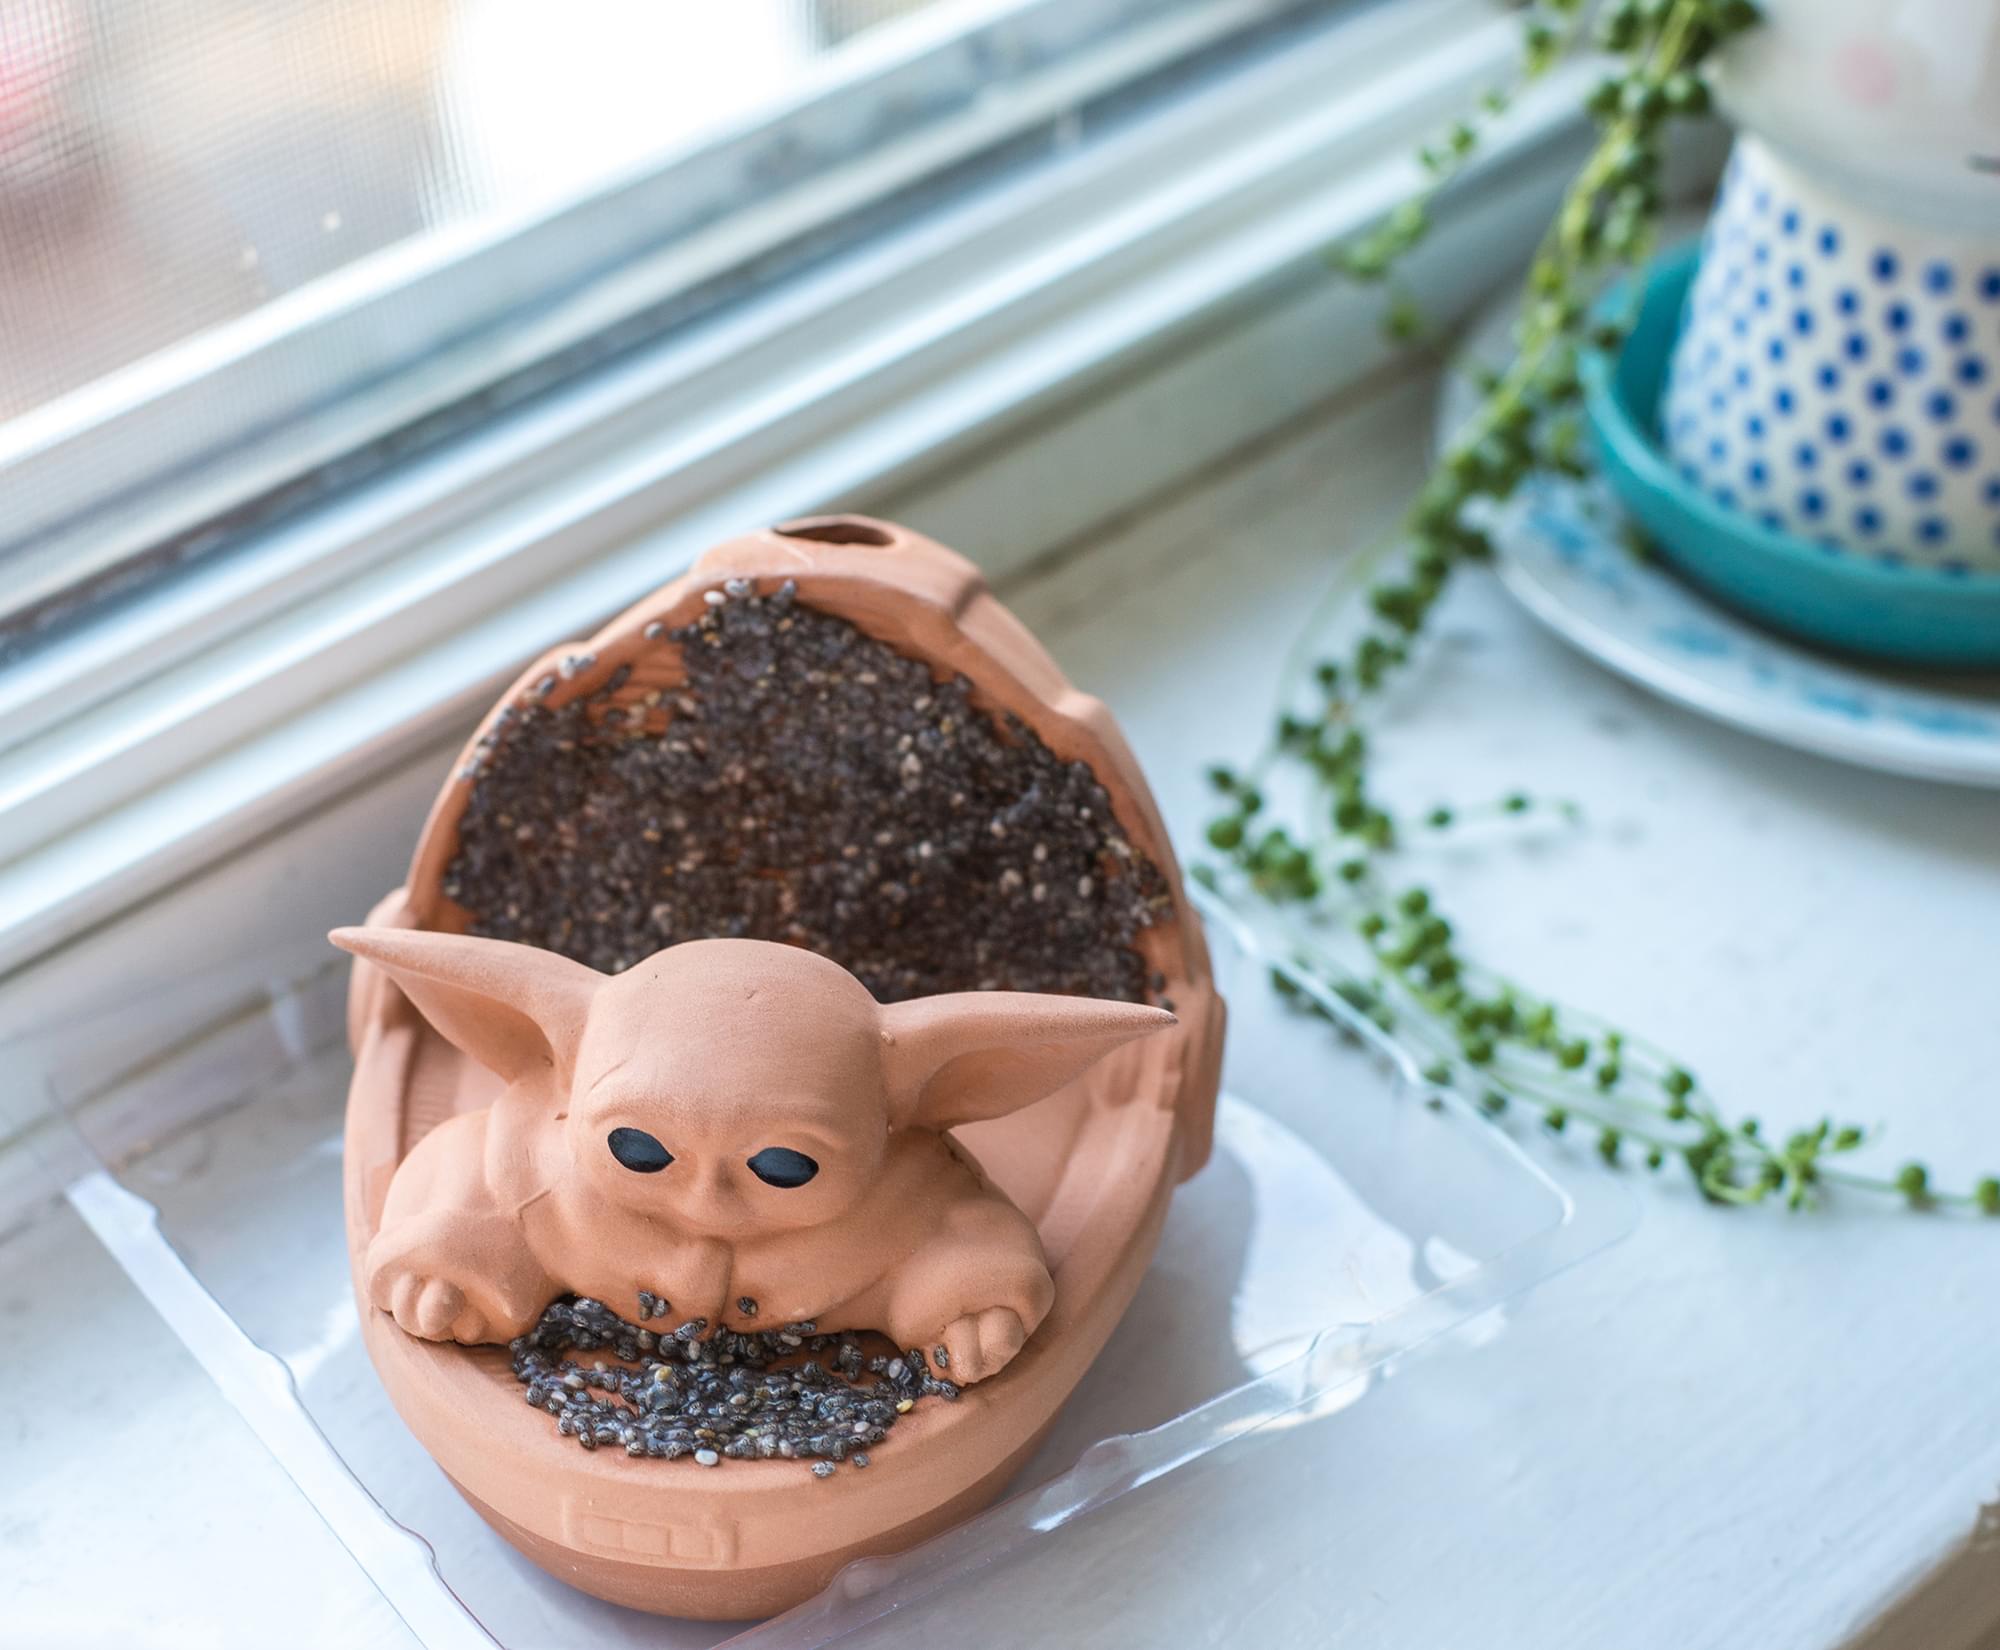 Chia -Pet Planter Decorat Pottery Sunlight Fast-Growing Seed Pack- Star Wars Yoda the Child- Orange - image 5 of 7